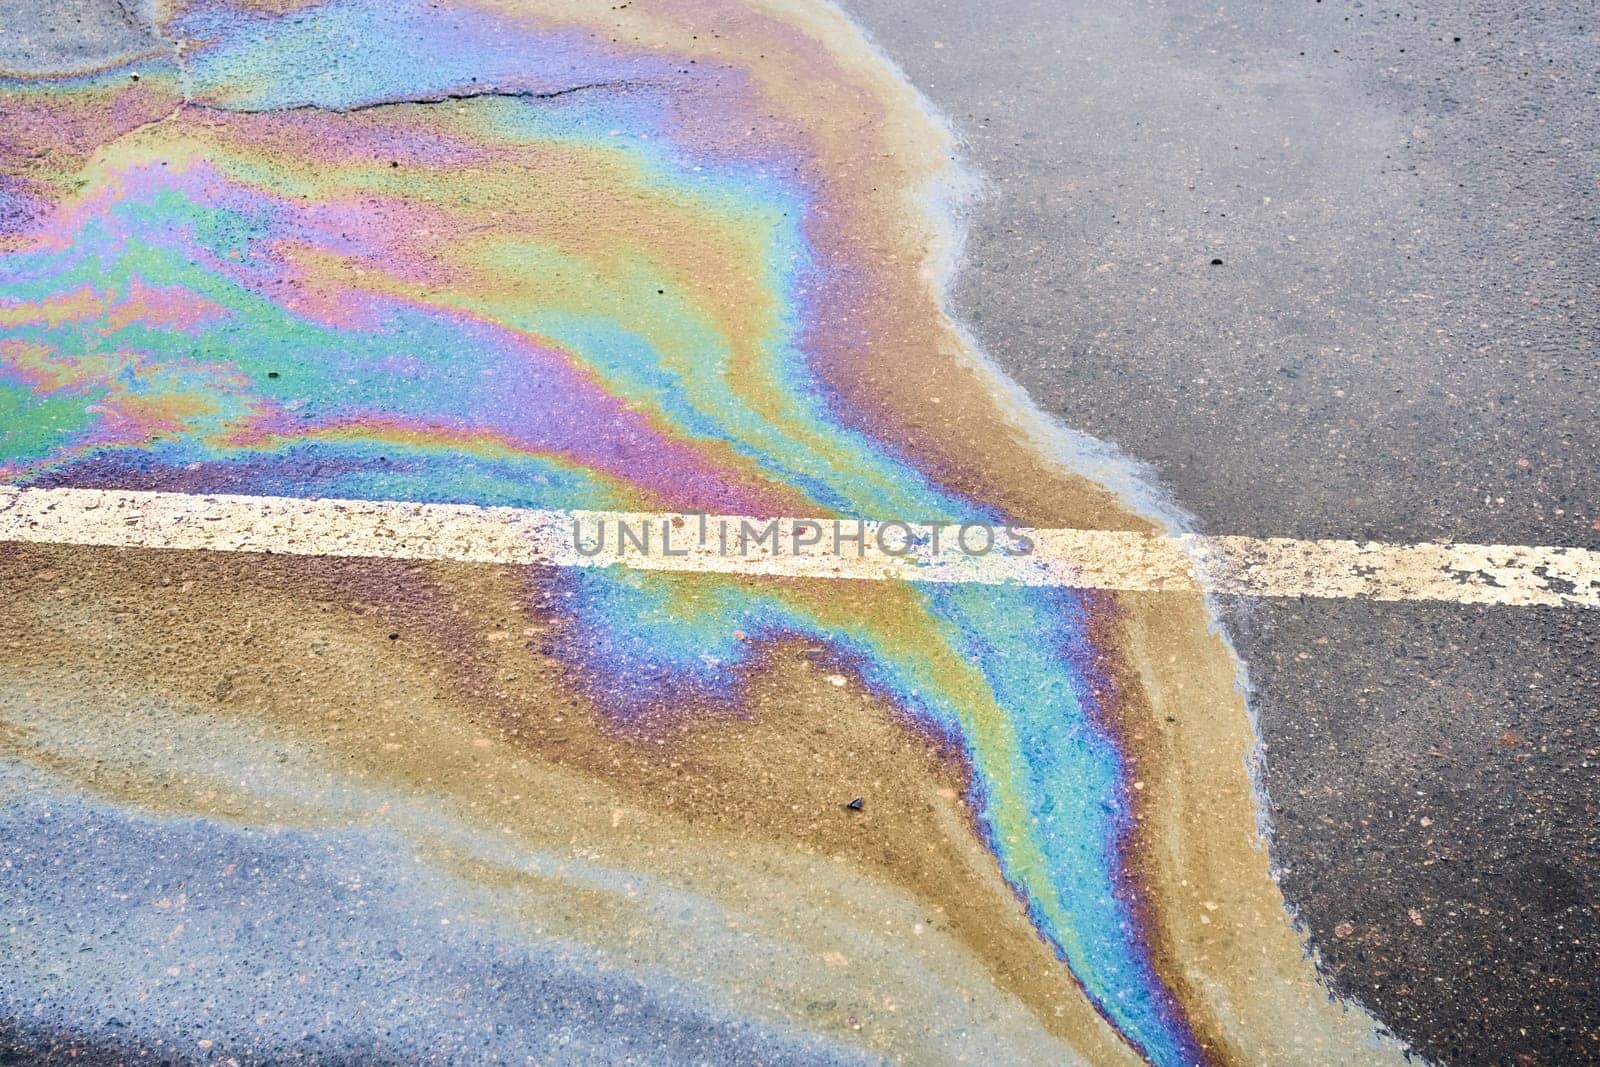 Oil spillage on wet pavement, parking lot with dividing lines, underscoring the environmental obstacles tied to water pollution by AliaksandrFilimonau